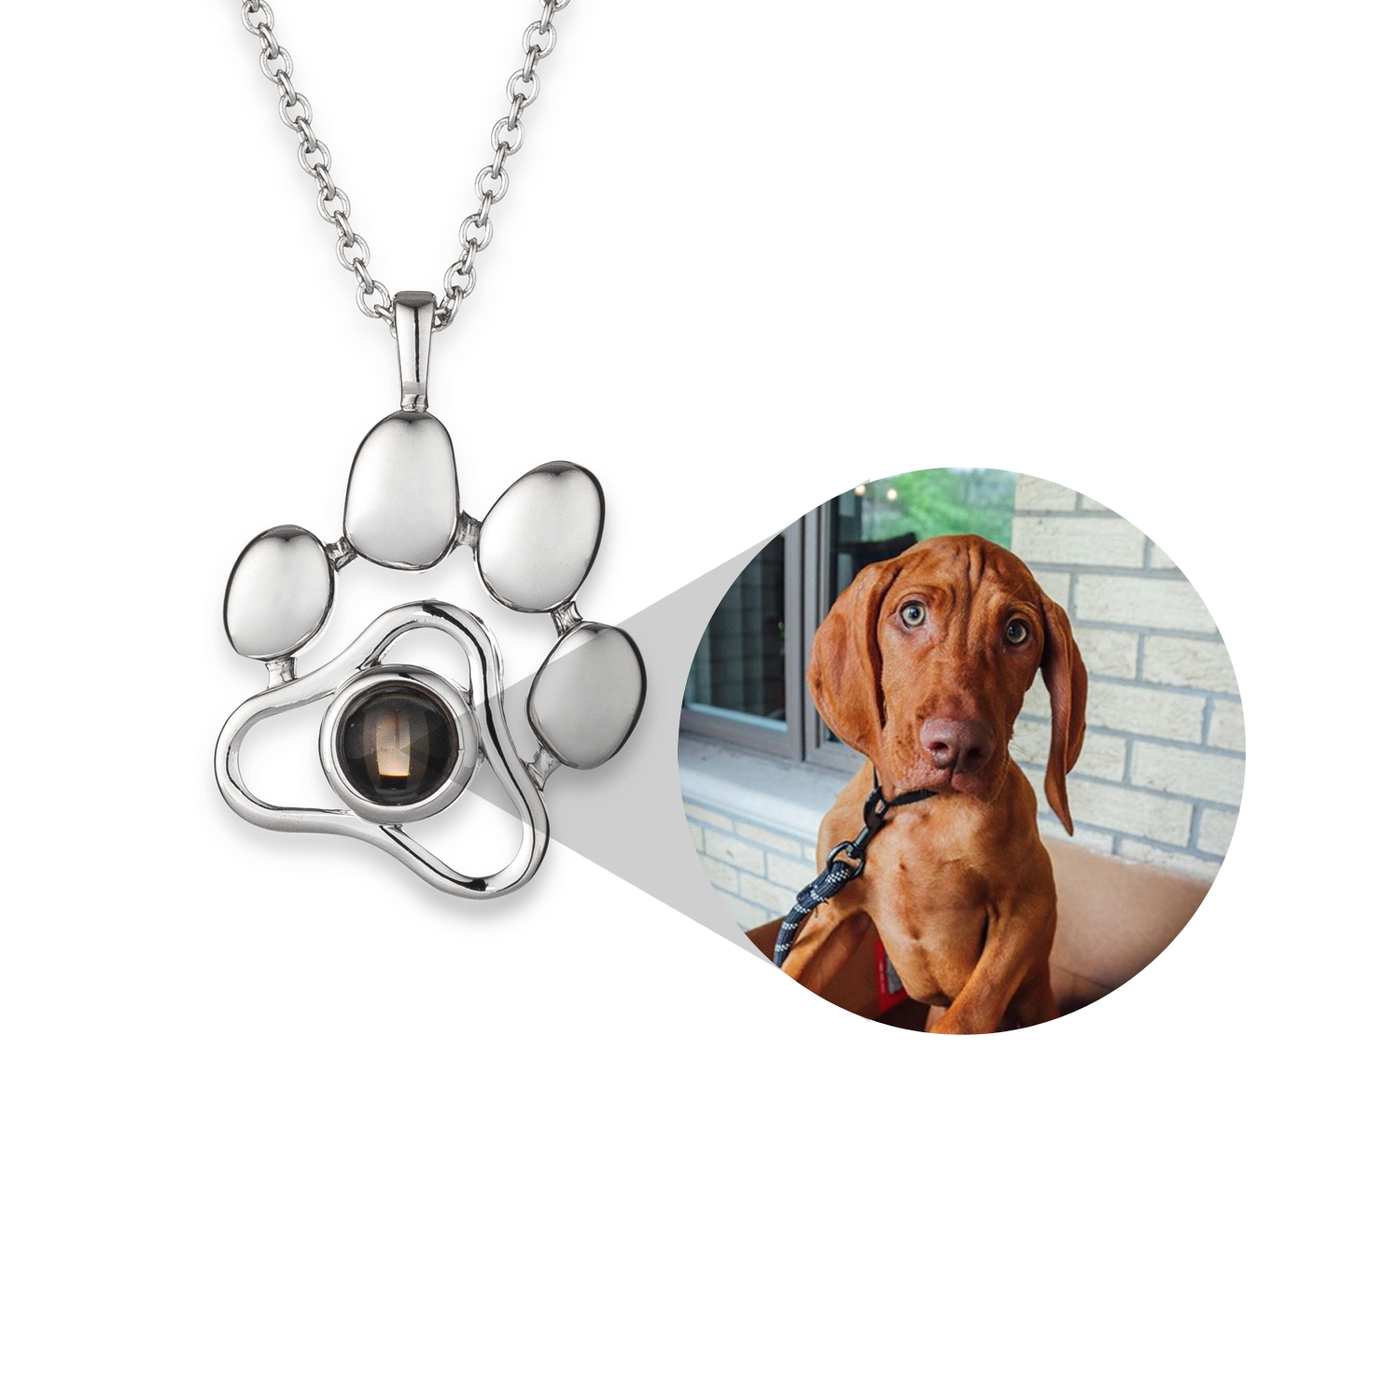 Personalized Pet Photo Projection Necklace/Keychain